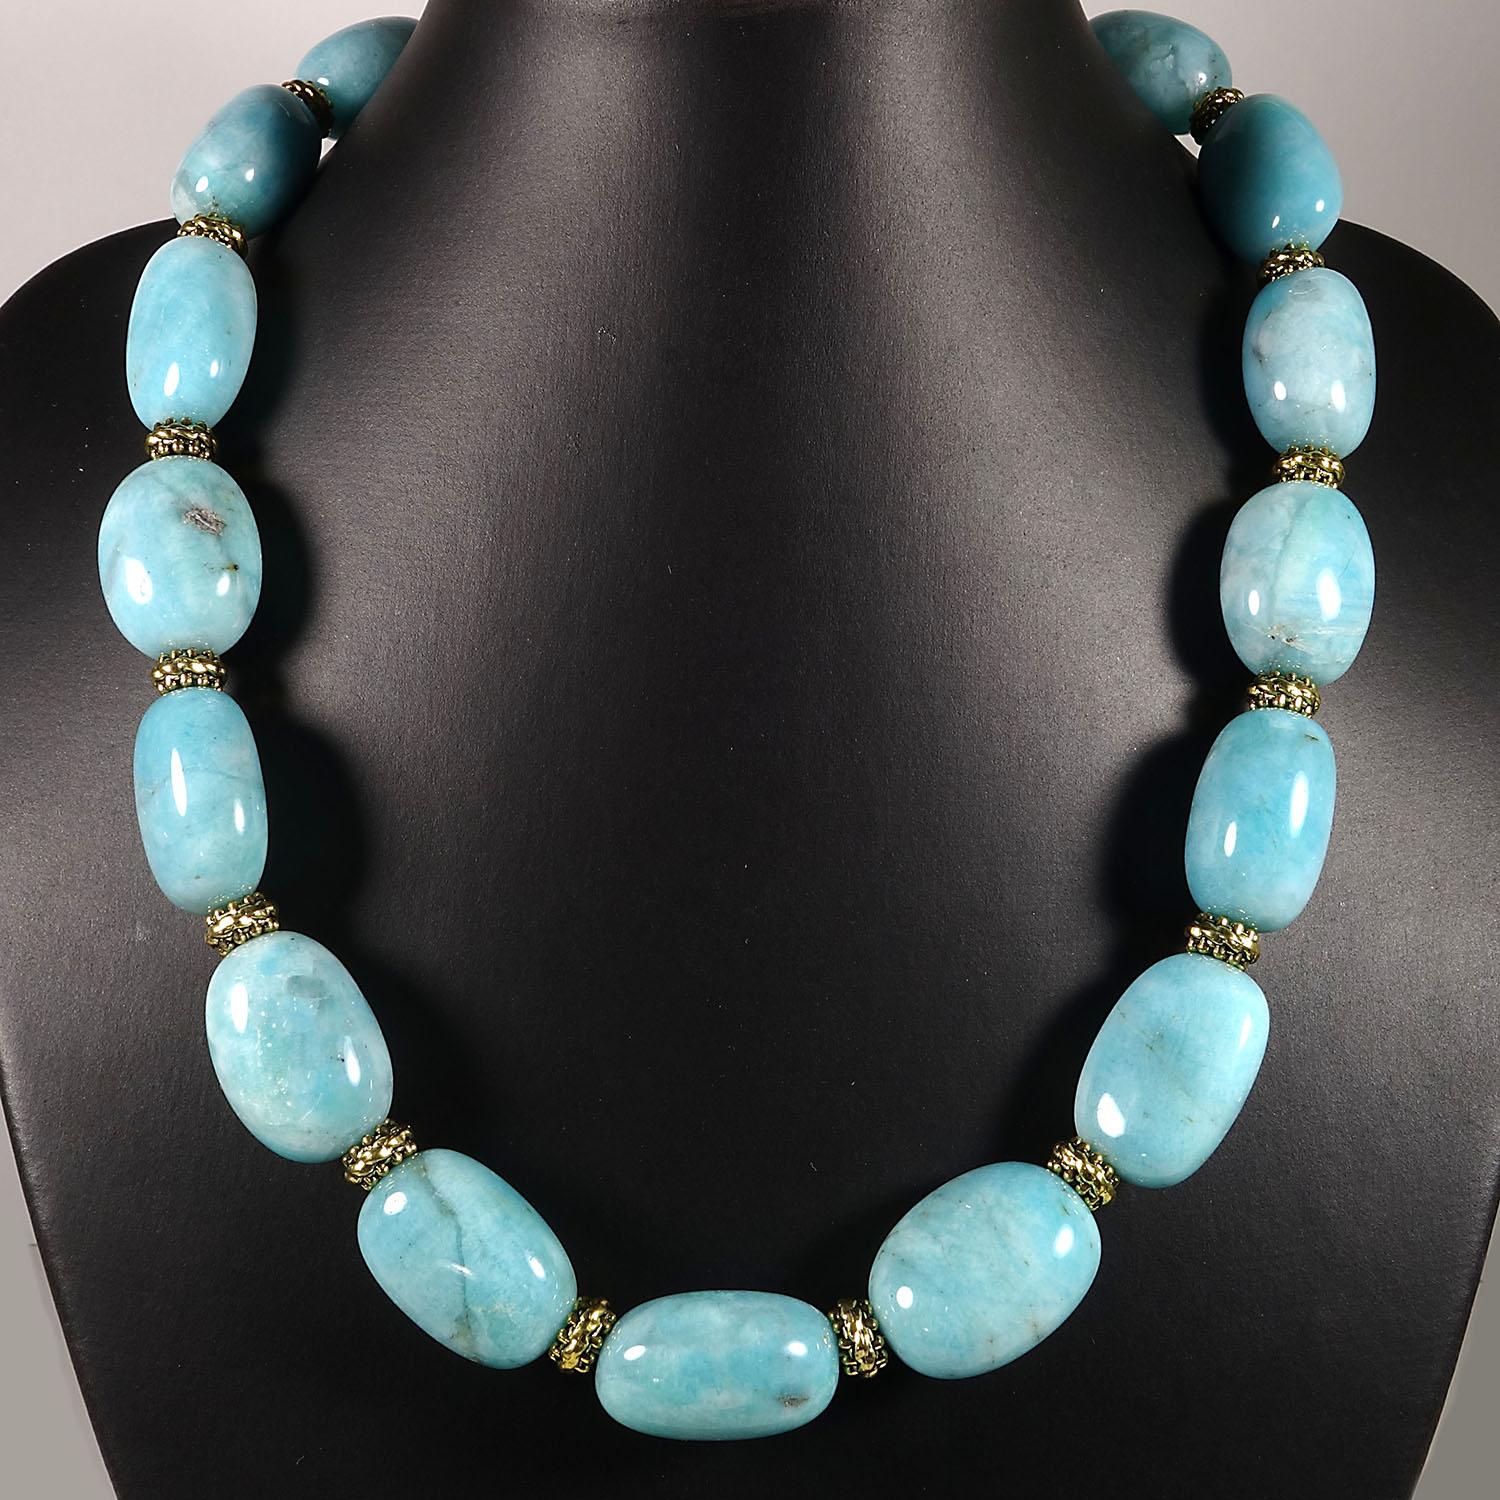 Unique necklace of highly polished Amazonite nuggets accented with decorative bronze tone Bali beads.
These gorgeous nuggets measure approximately 20-23x16MM
This handmade Amazonite nugget necklace is enhanced with 8MM detailed bronze Bali beads and